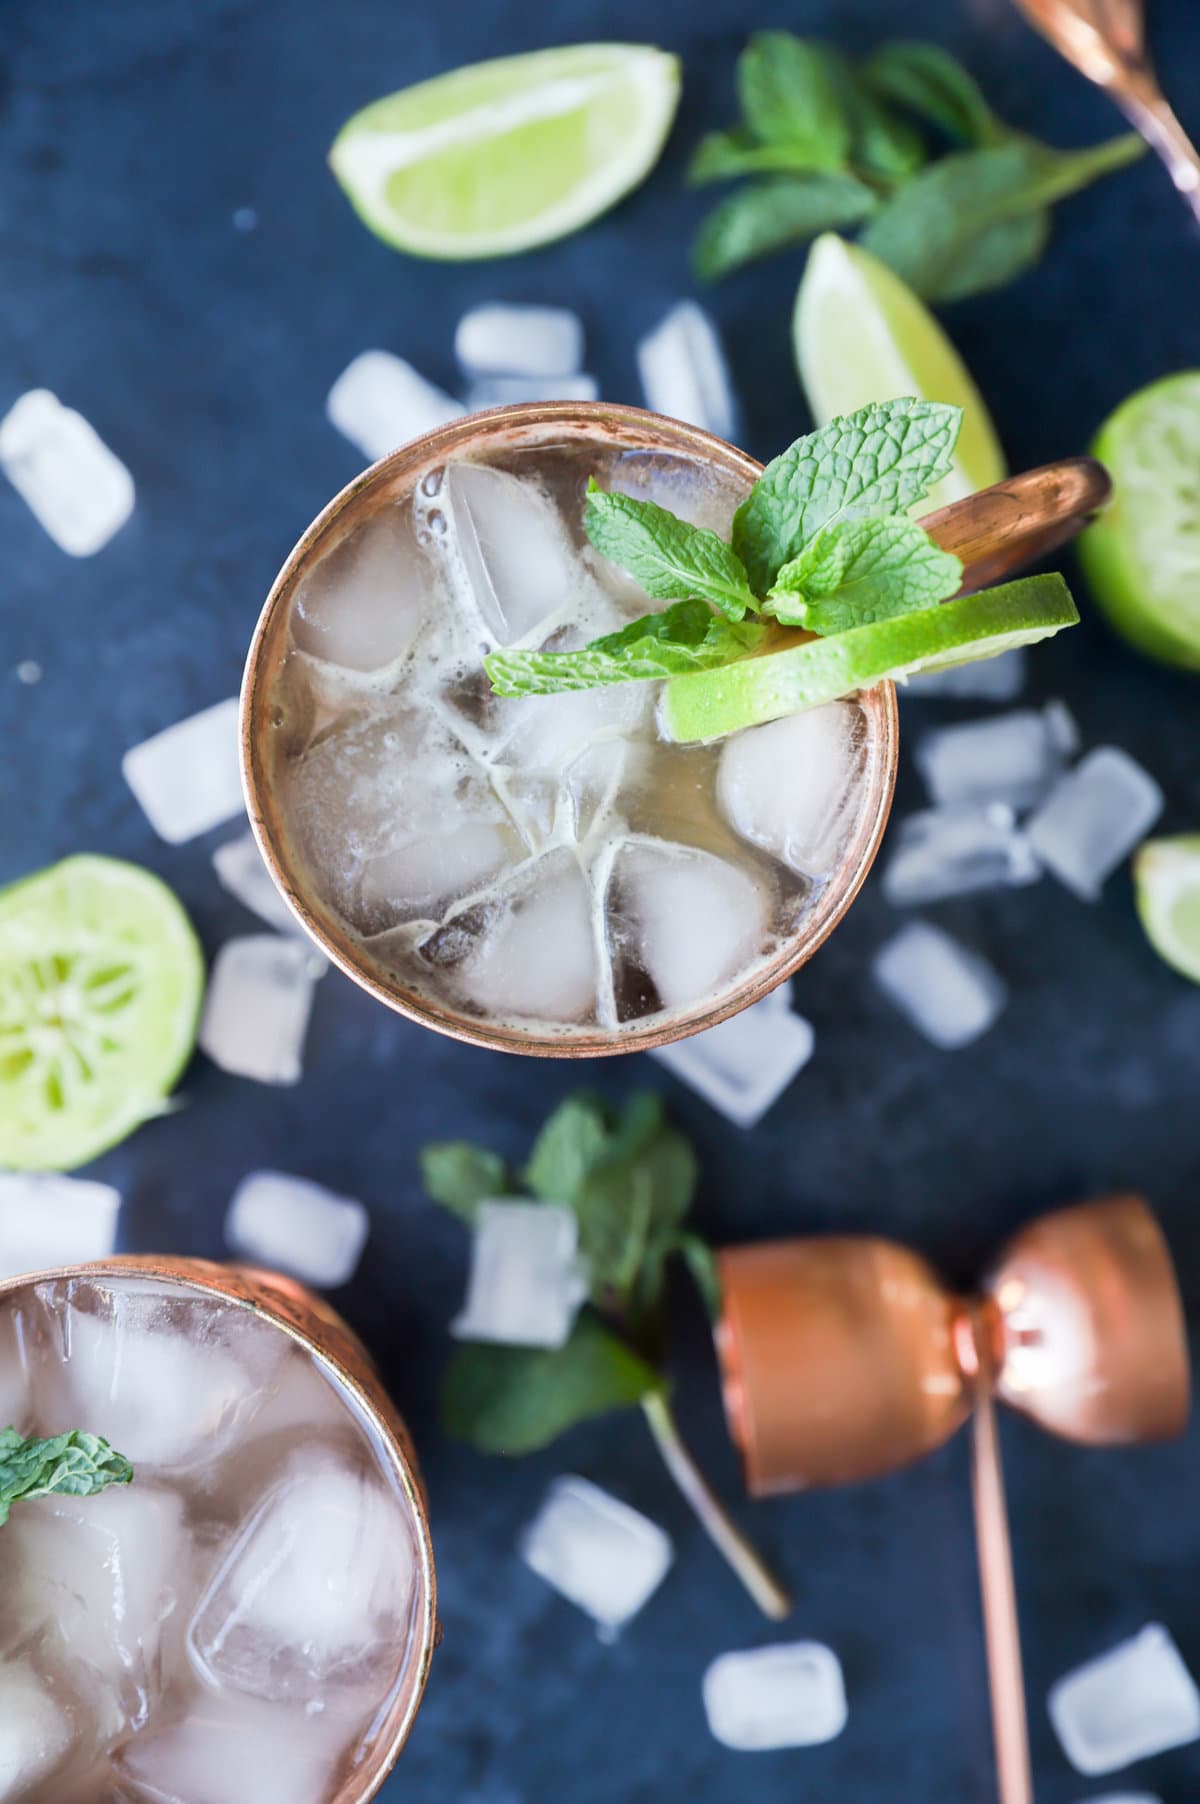 London Mule - Insanely Easy Recipes